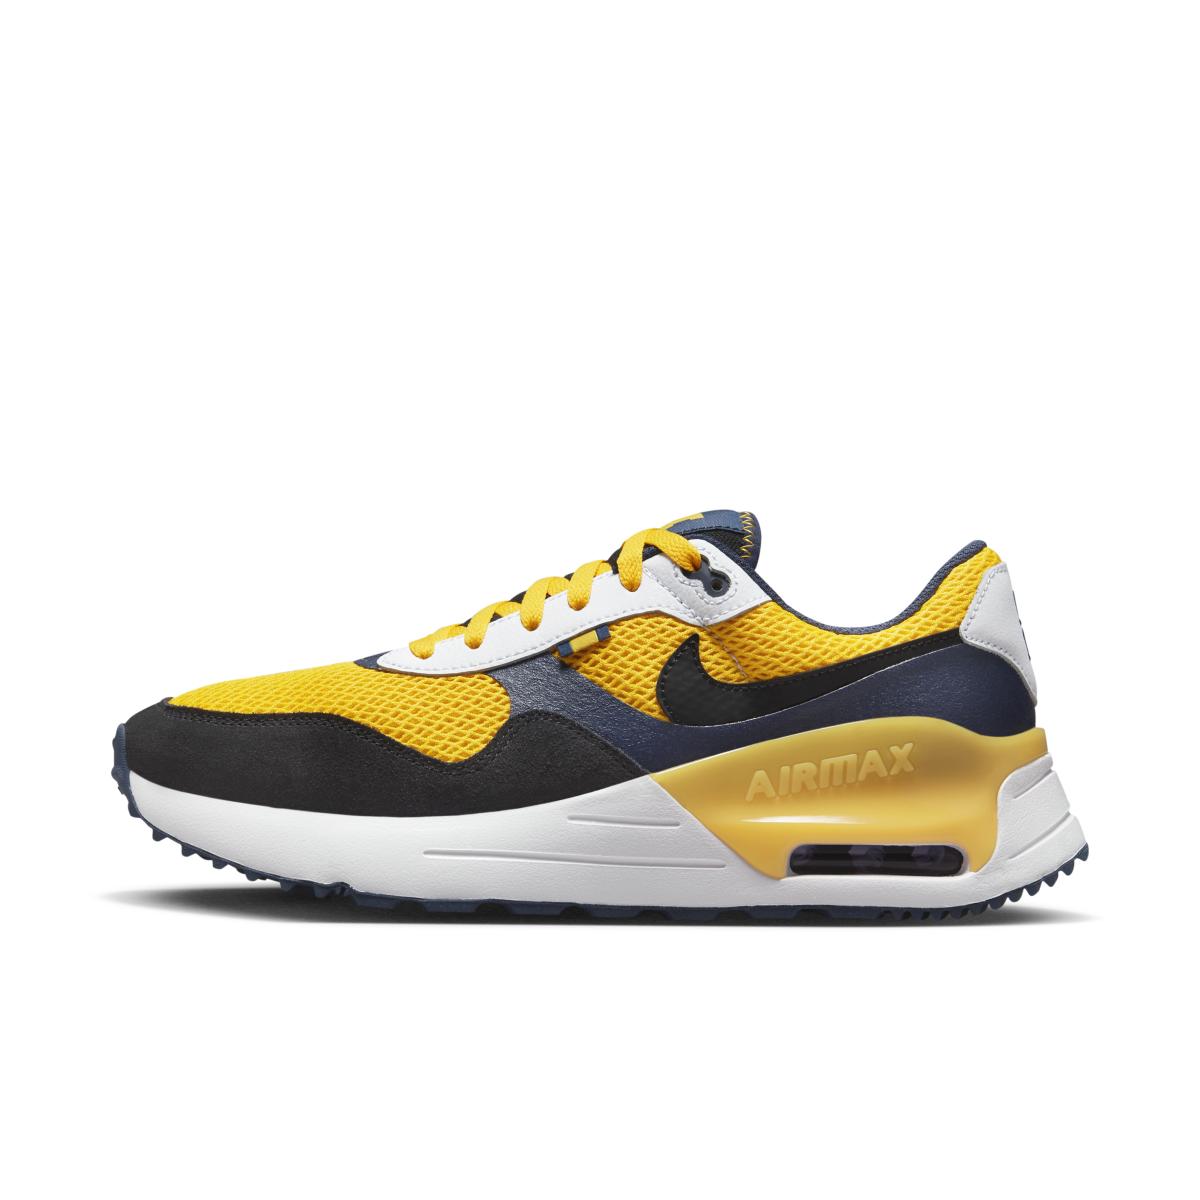 Michigan Wolverines Air Max SYSTM - $109.99